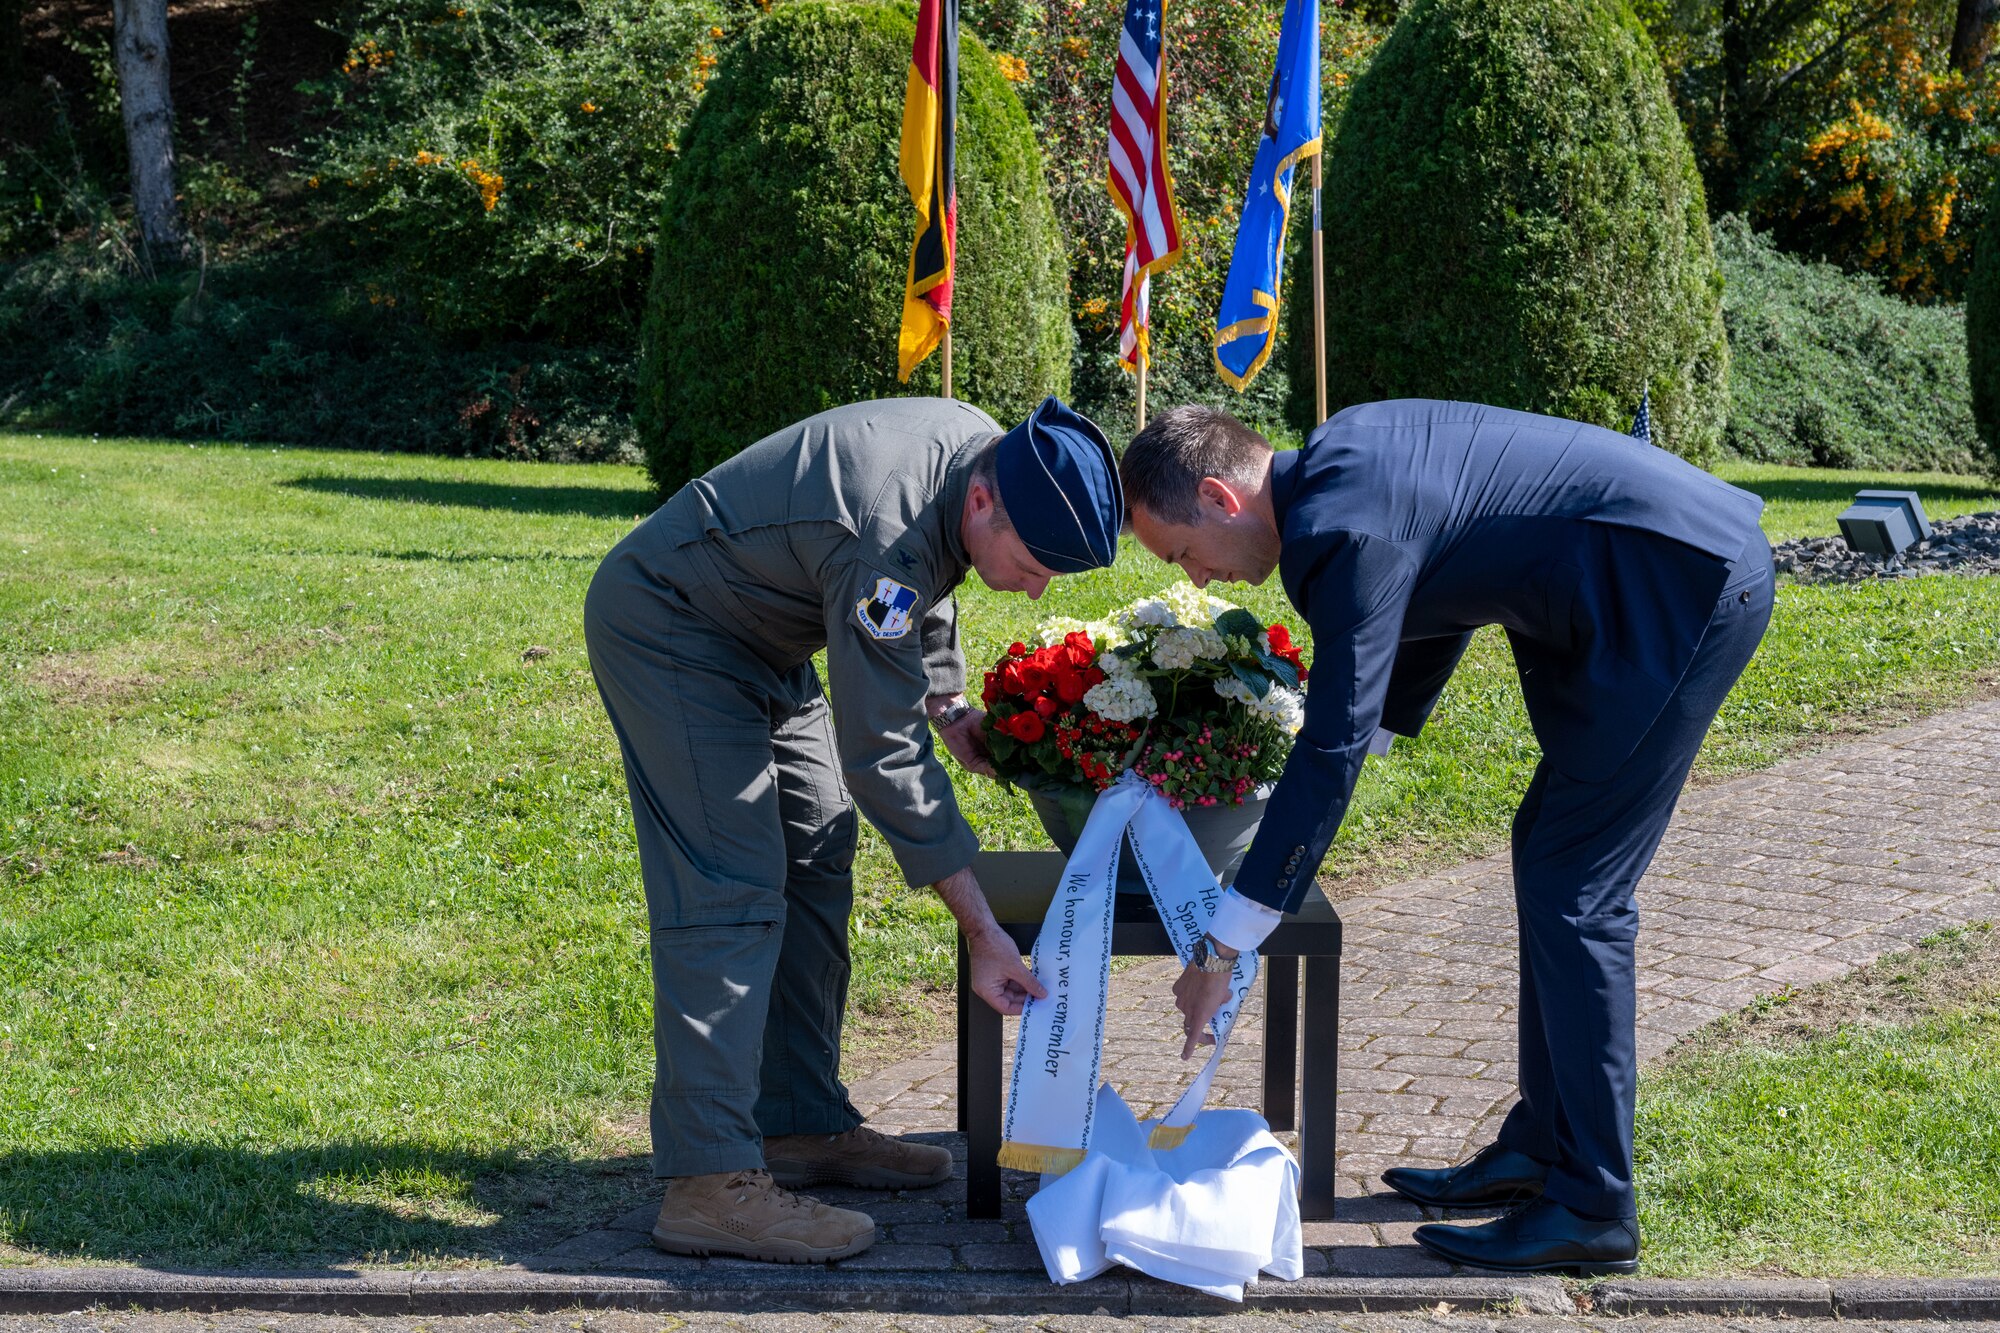 U.S. Air Force Col. Kevin Crofton, 52nd Fighter Wing commander, and Herr Manuel Follmann, area mayor of Wittlich-Land, Germany, lay a wreath during a 9/11 Remembrance ceremony